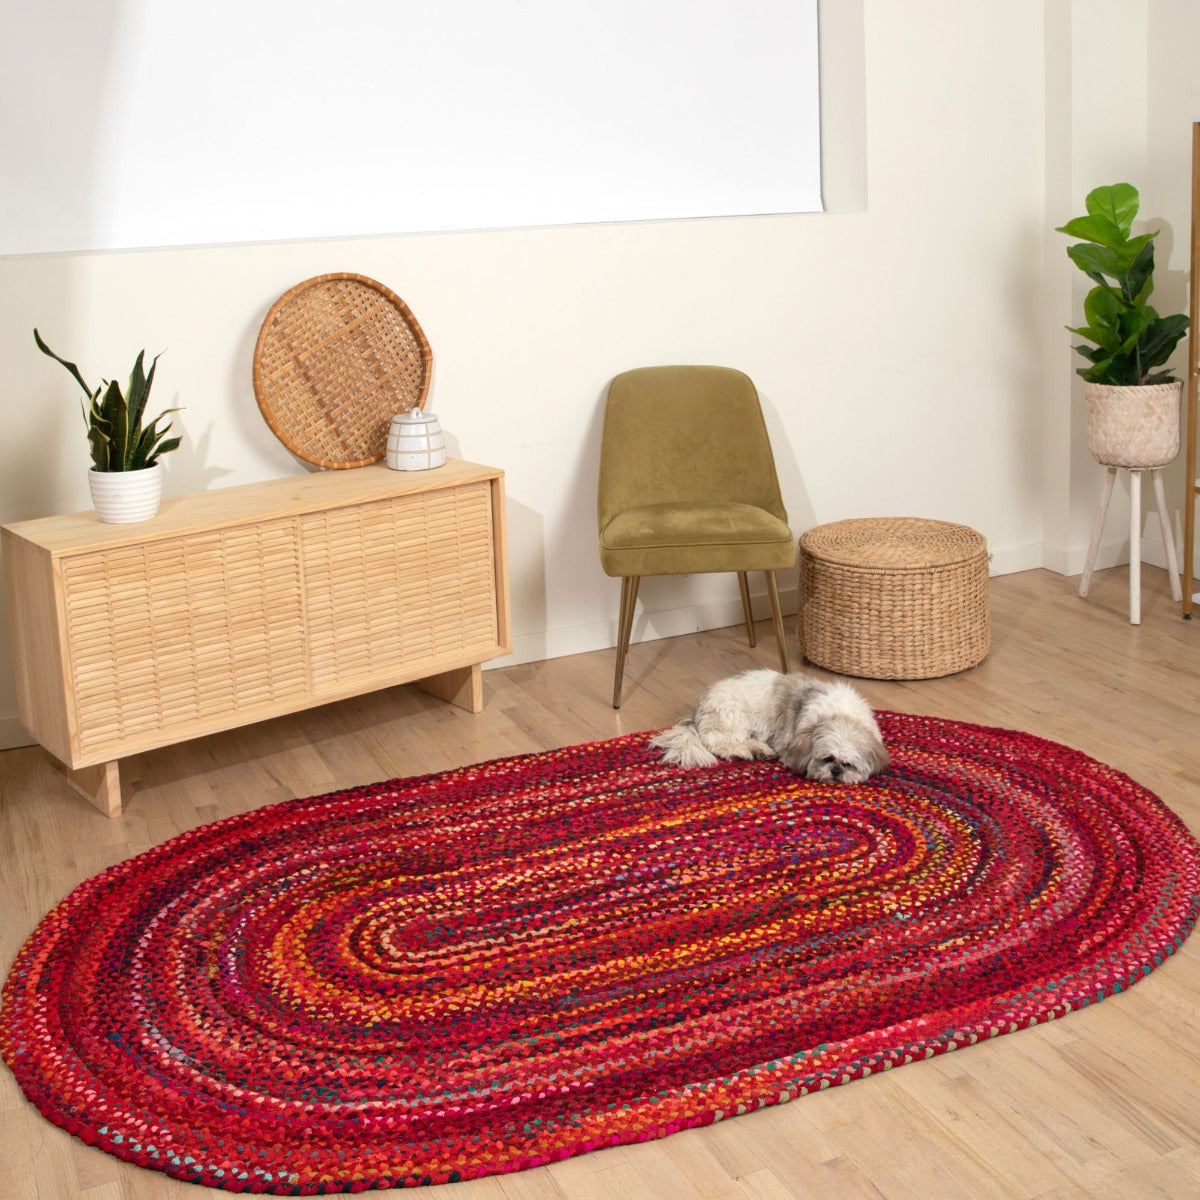 Bohemian Colorful Cotton Area Rugs Hand Braided Oval Rugs Multi Color Home  Decor Rugs Bohemian Rug Floor Rug Room Decor New Design Rugs 